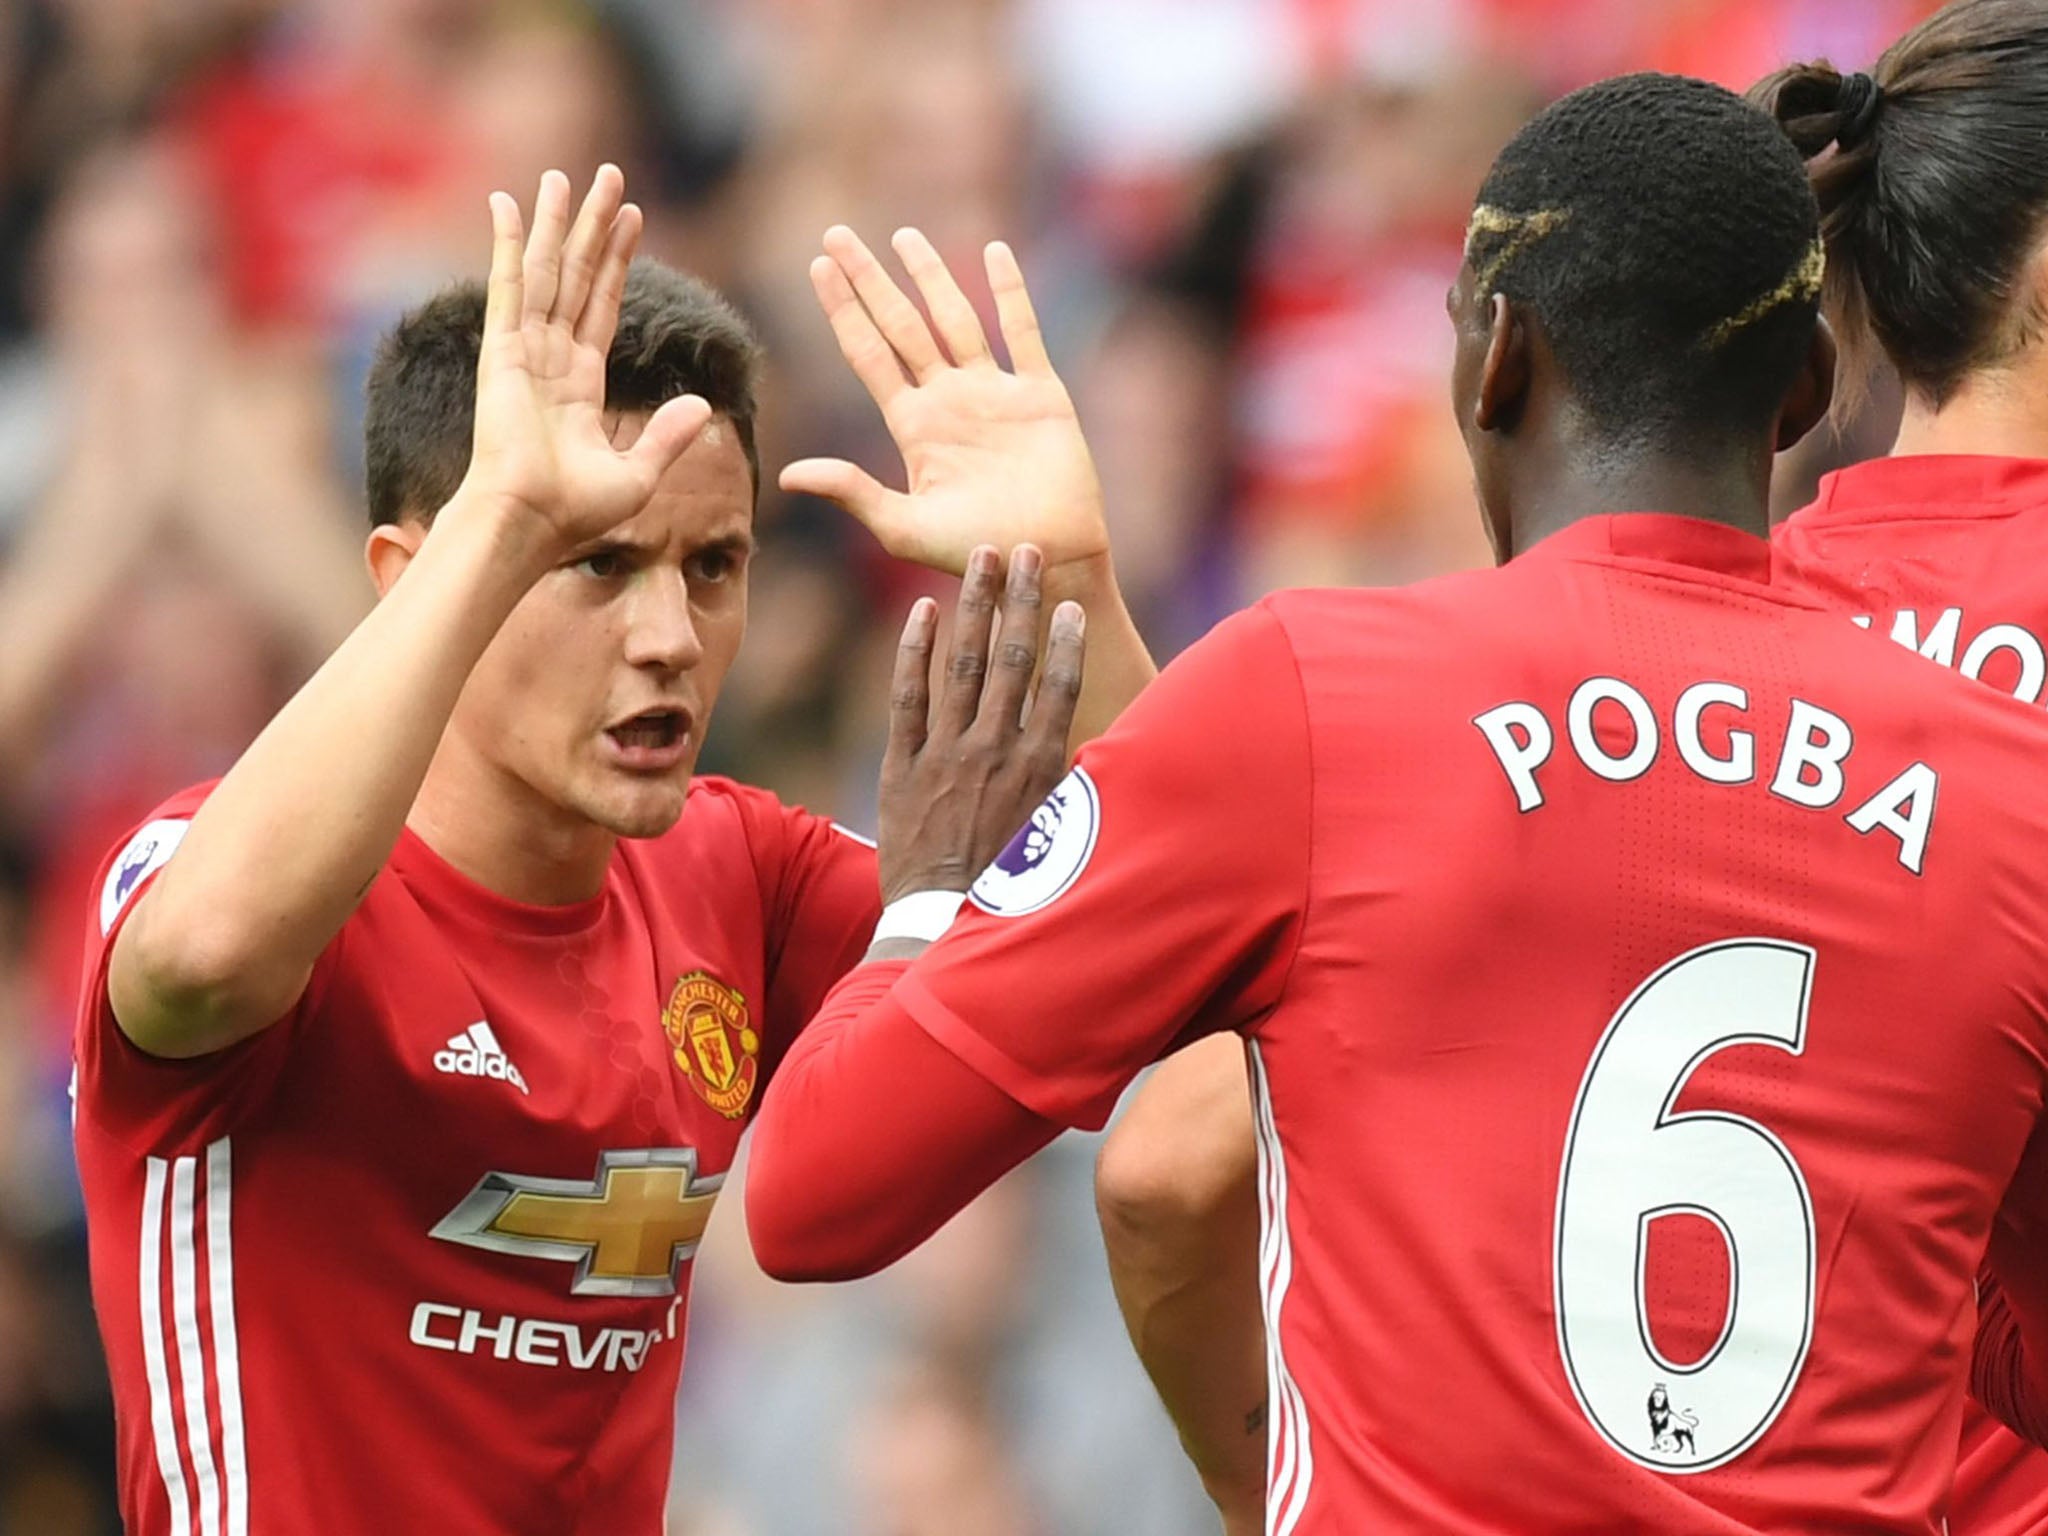 Saturday was the first game Pogba and Herrera had started together